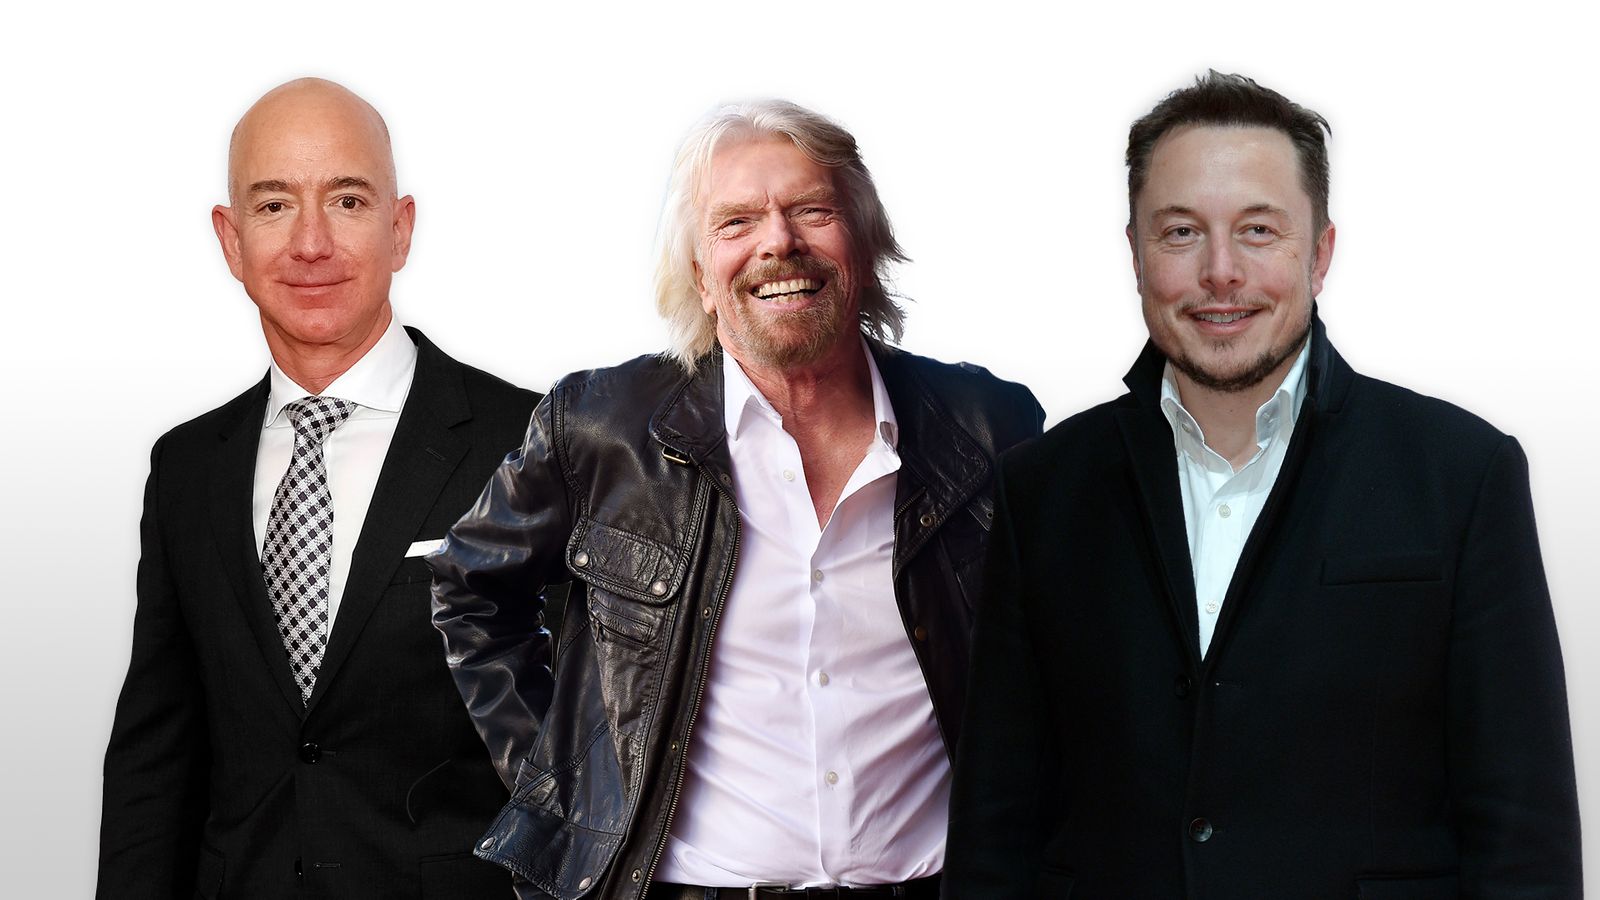 Bezos, Branson, Musk: What you need to know about the new space race